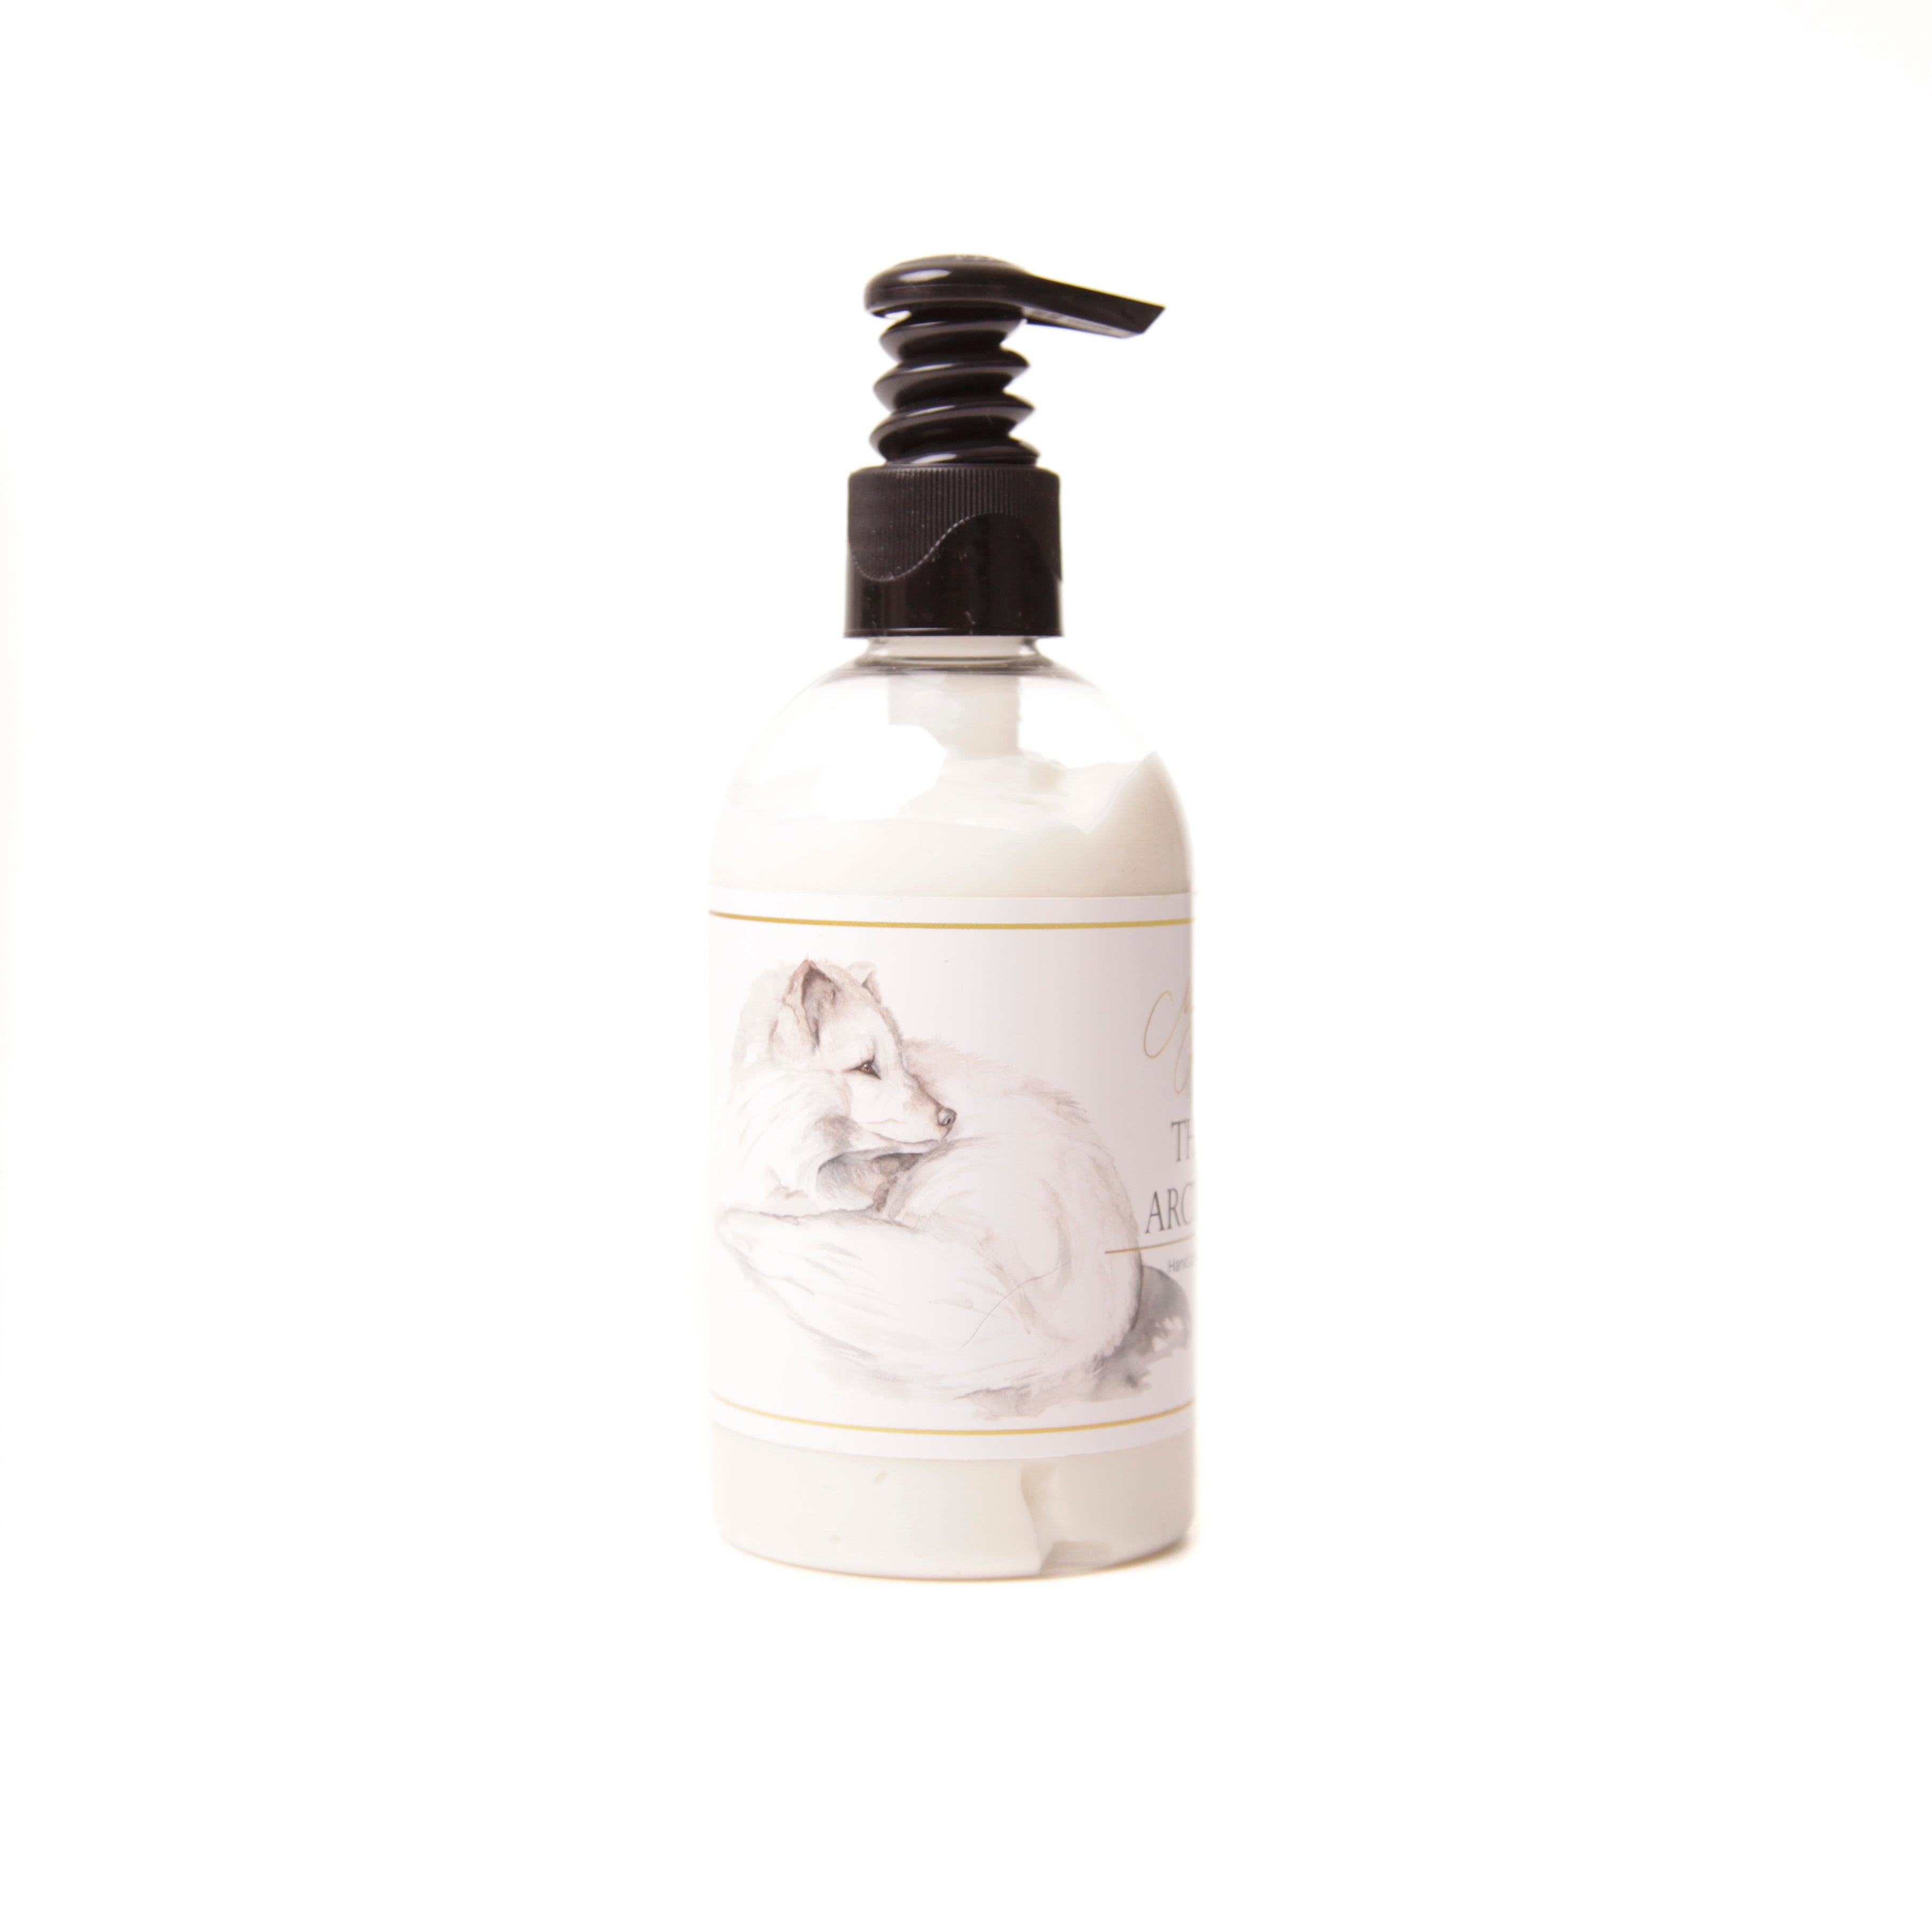 'The Arctic' Hand Lotion with Arctic Fox Design